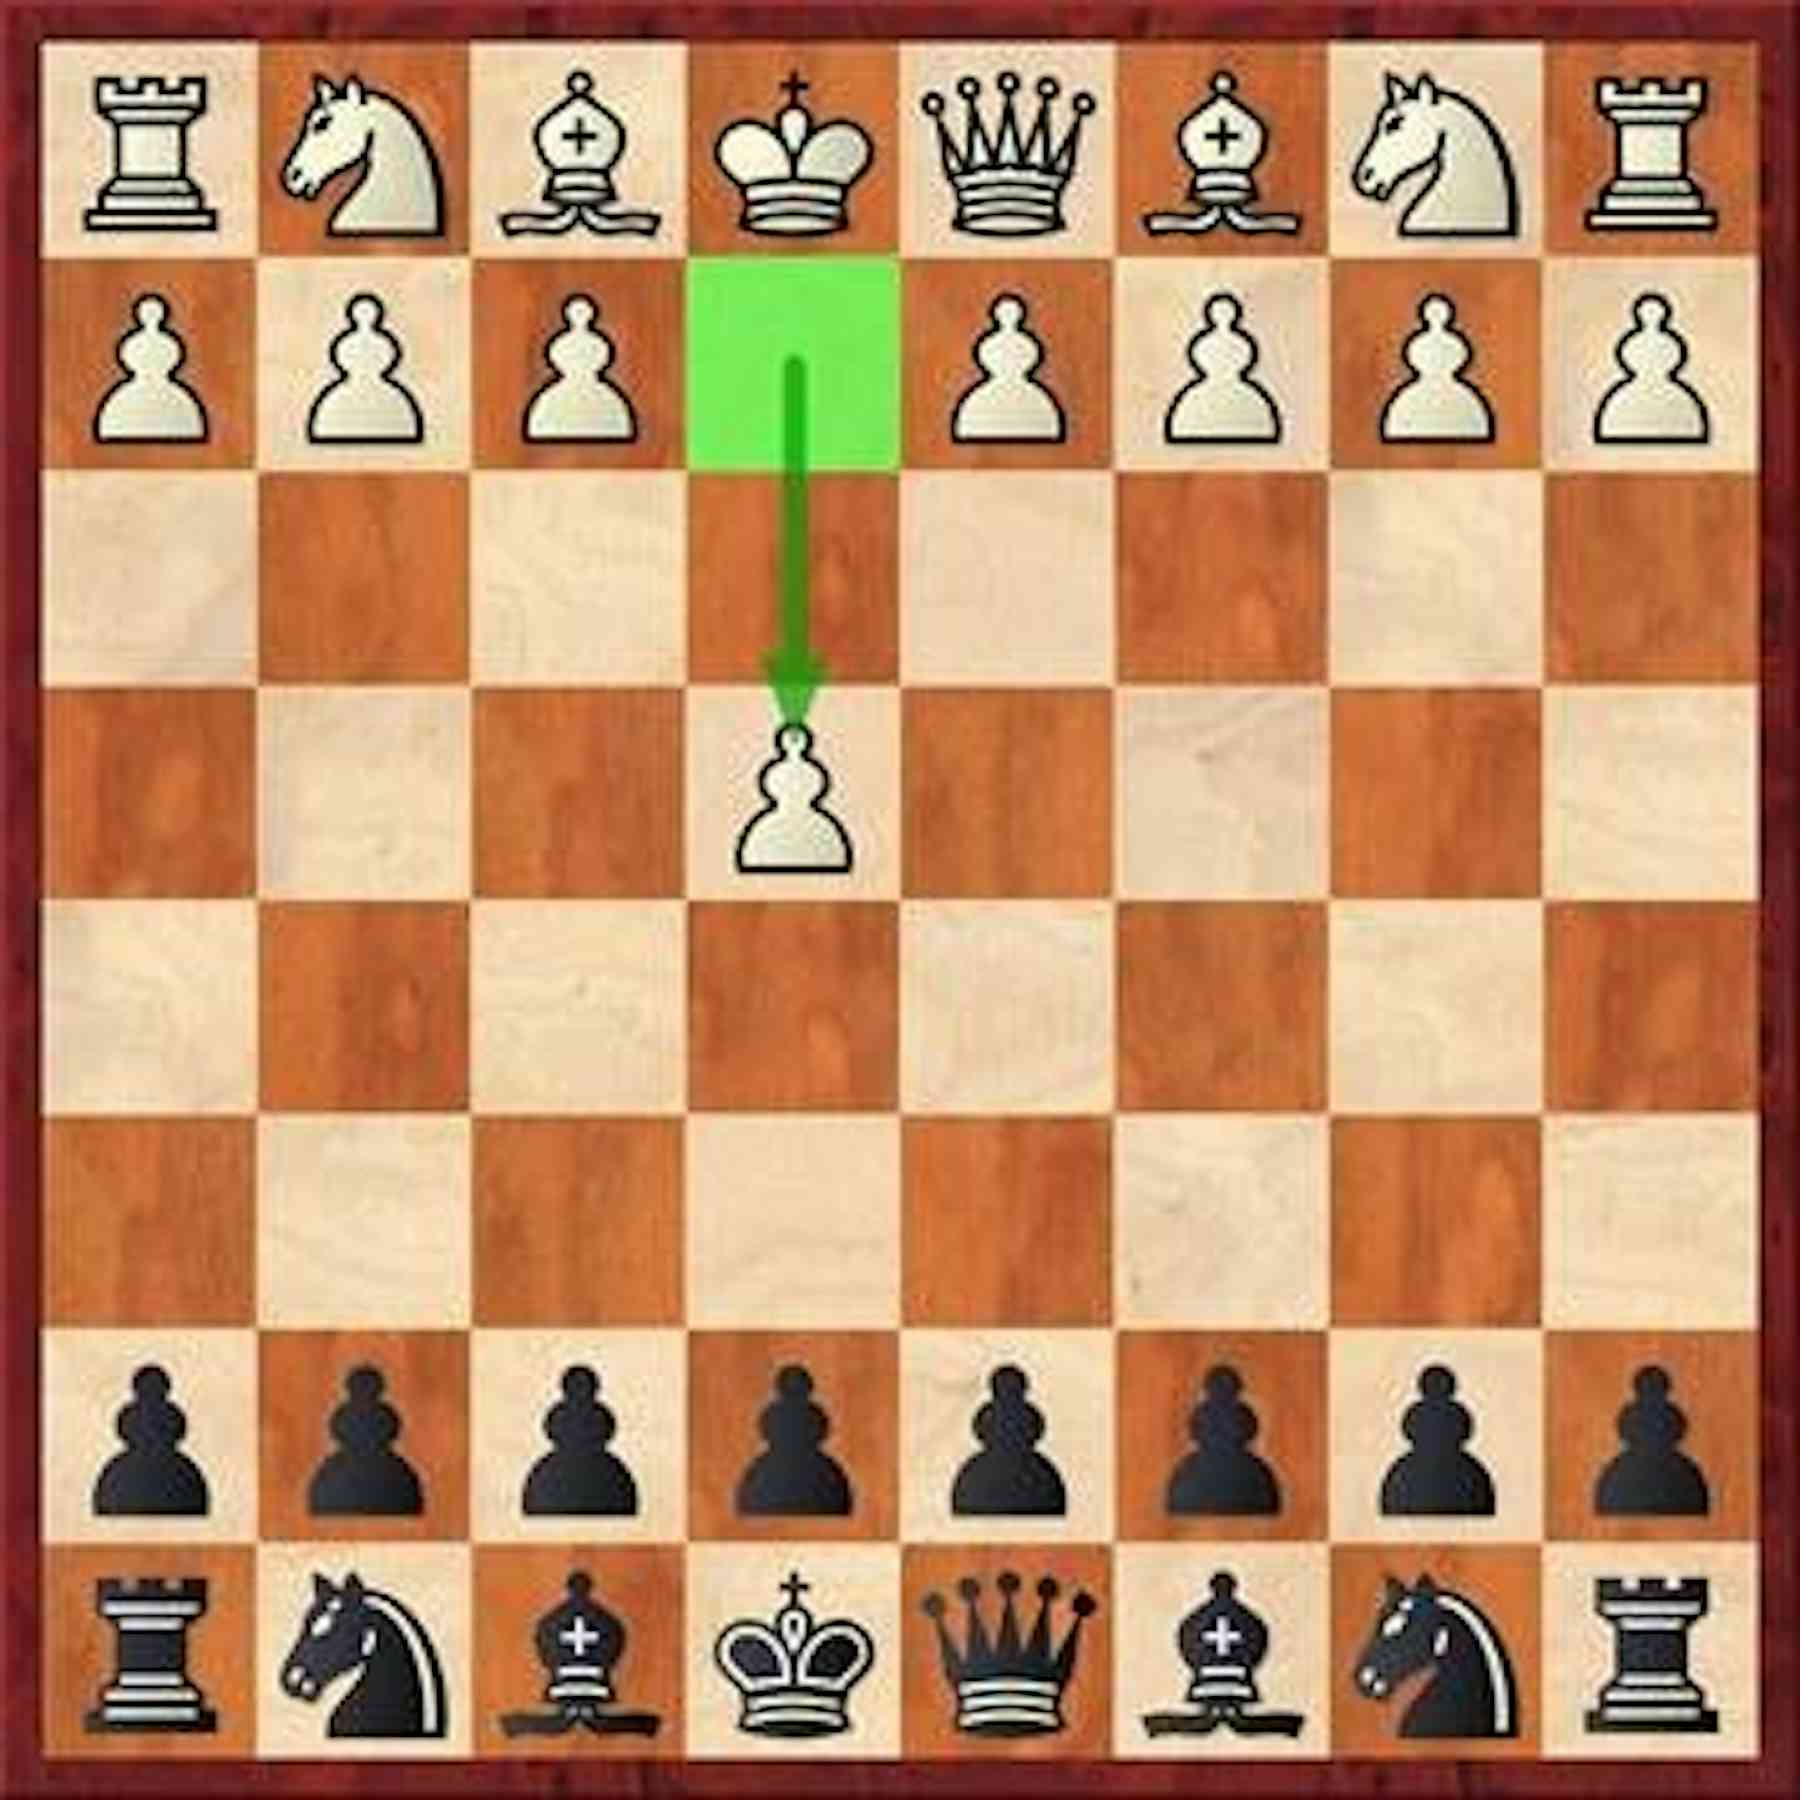 Why Does White Always Go First In Chess